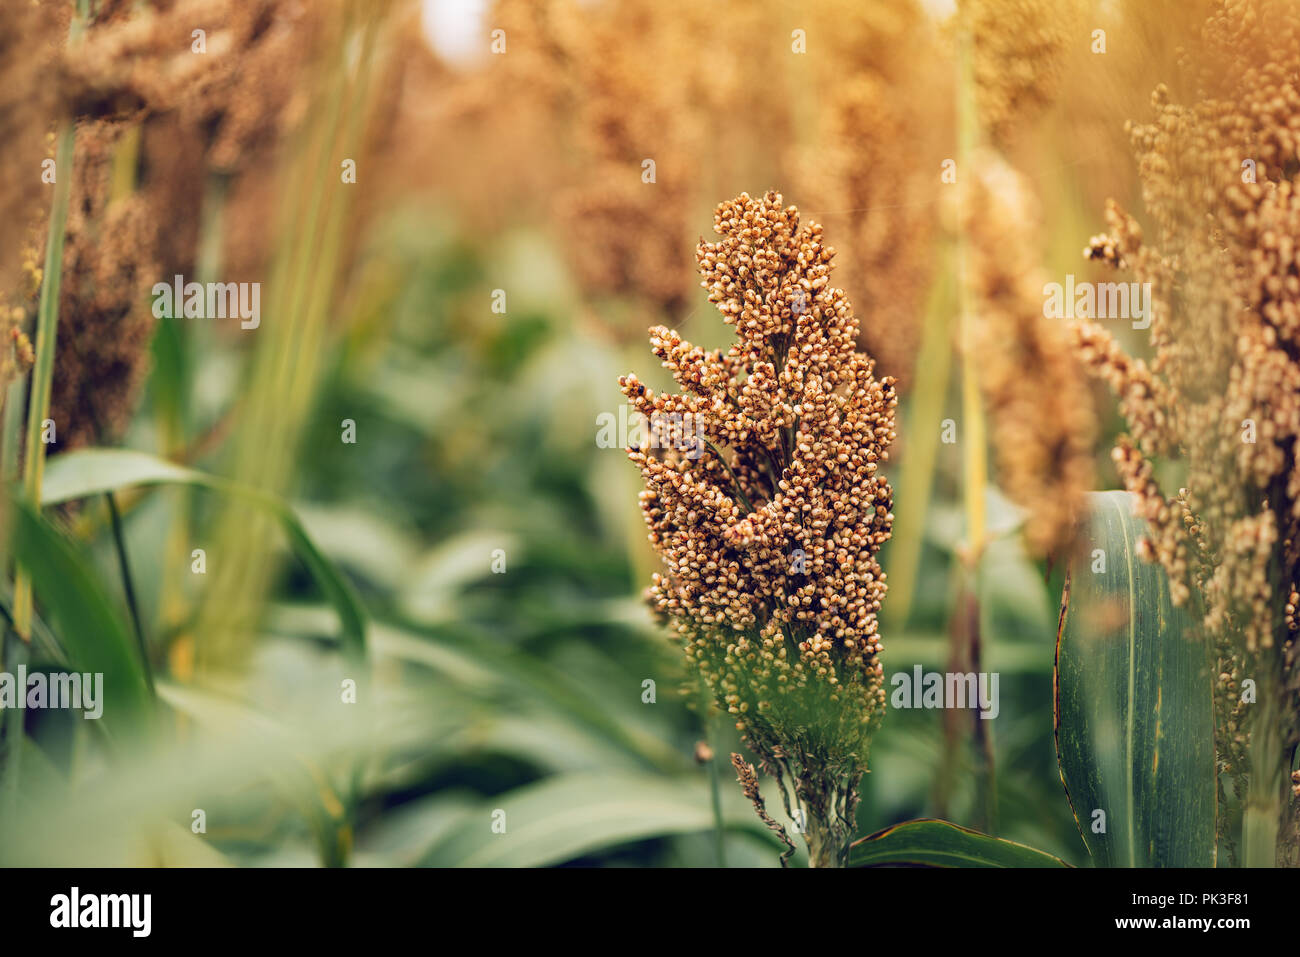 Sorghum, flowering plant is cultivated and grown for grains Stock Photo